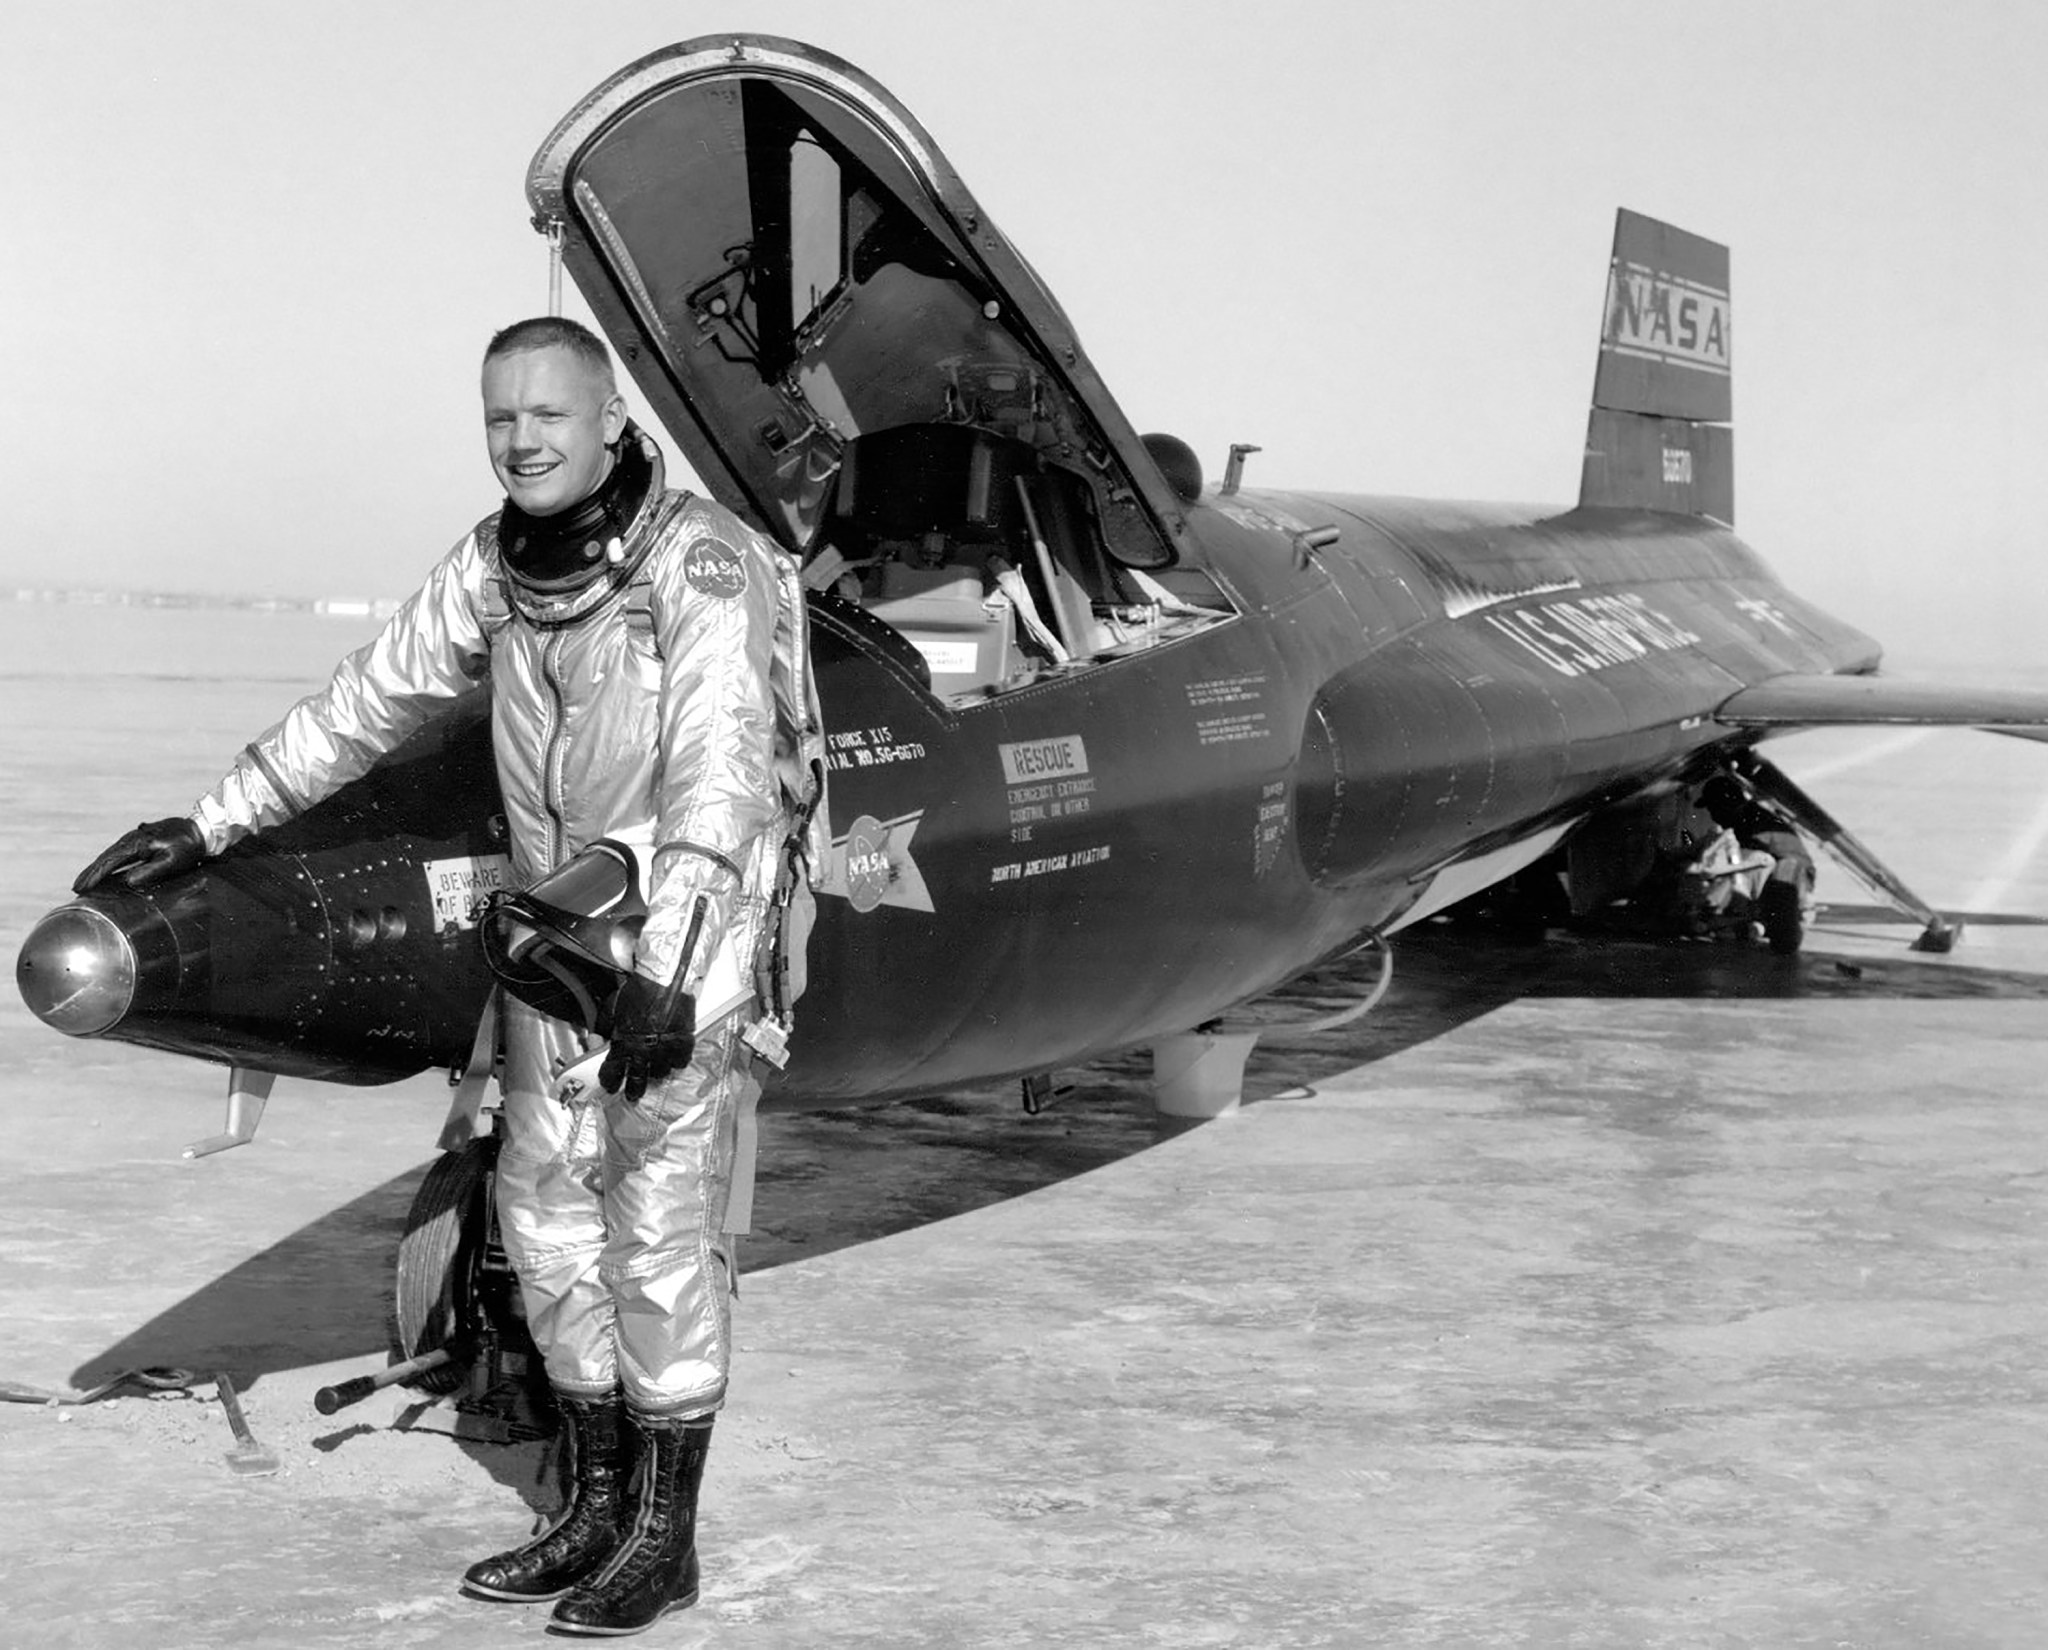 Neil Armstrong standing in front of X-15.